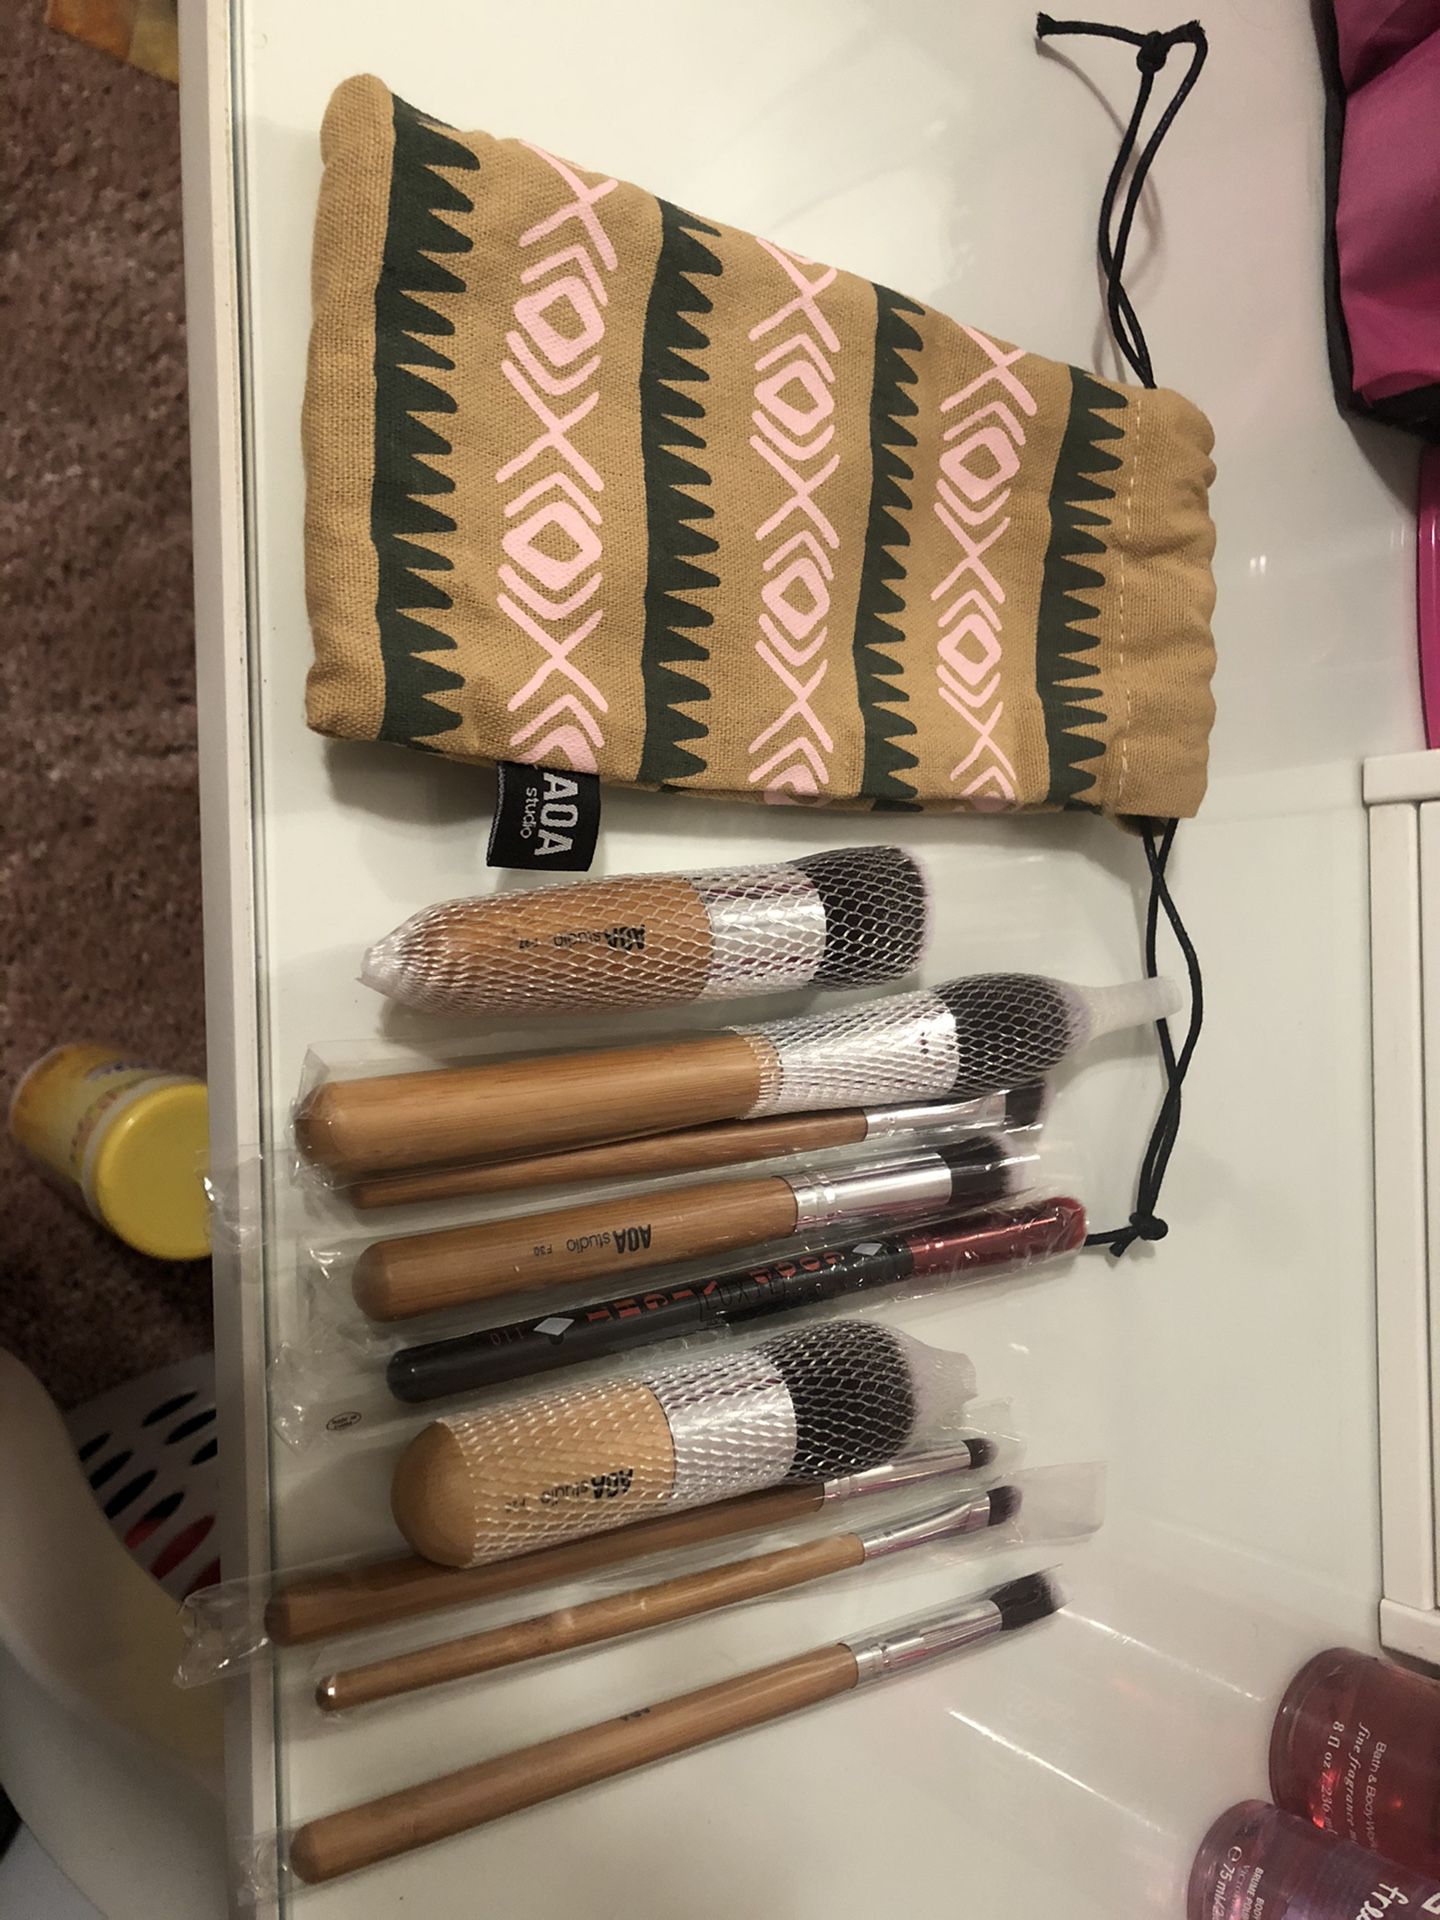 Makeup brushes with bag